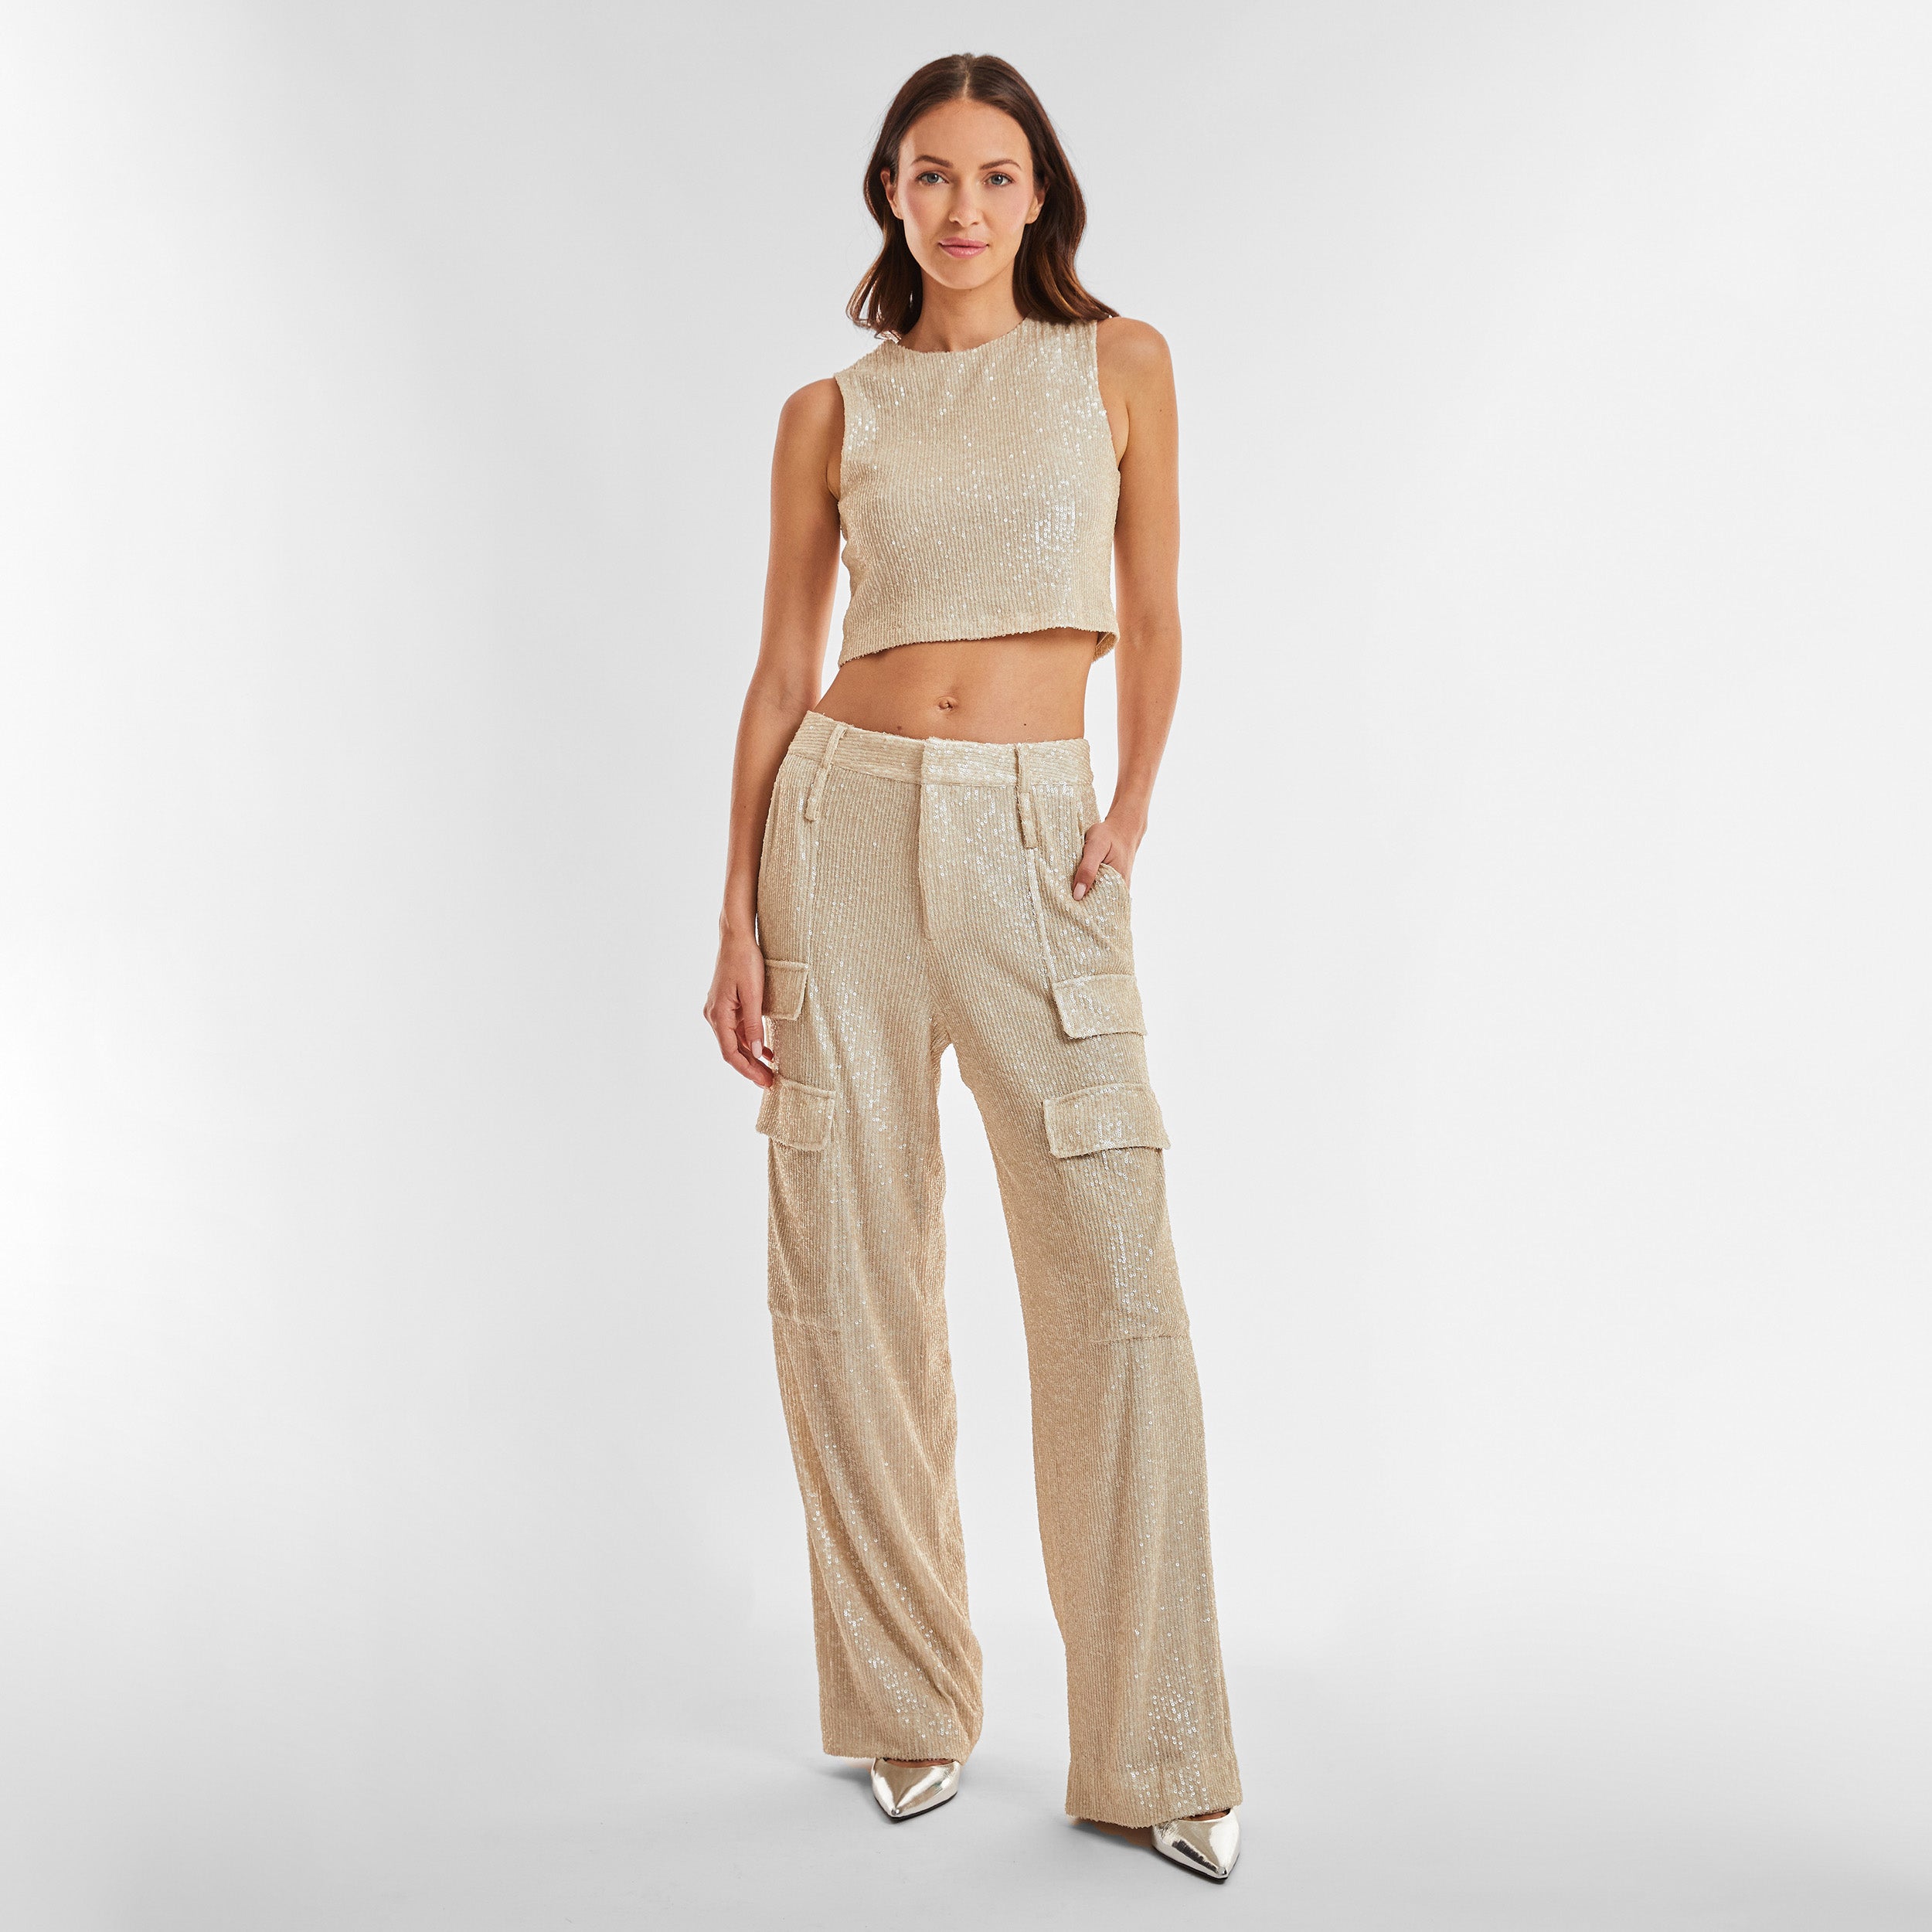 Full view of woman wearing Pearl Sequin Cargo Pant featuring Mid-rise with side pockets and cargo detail. 